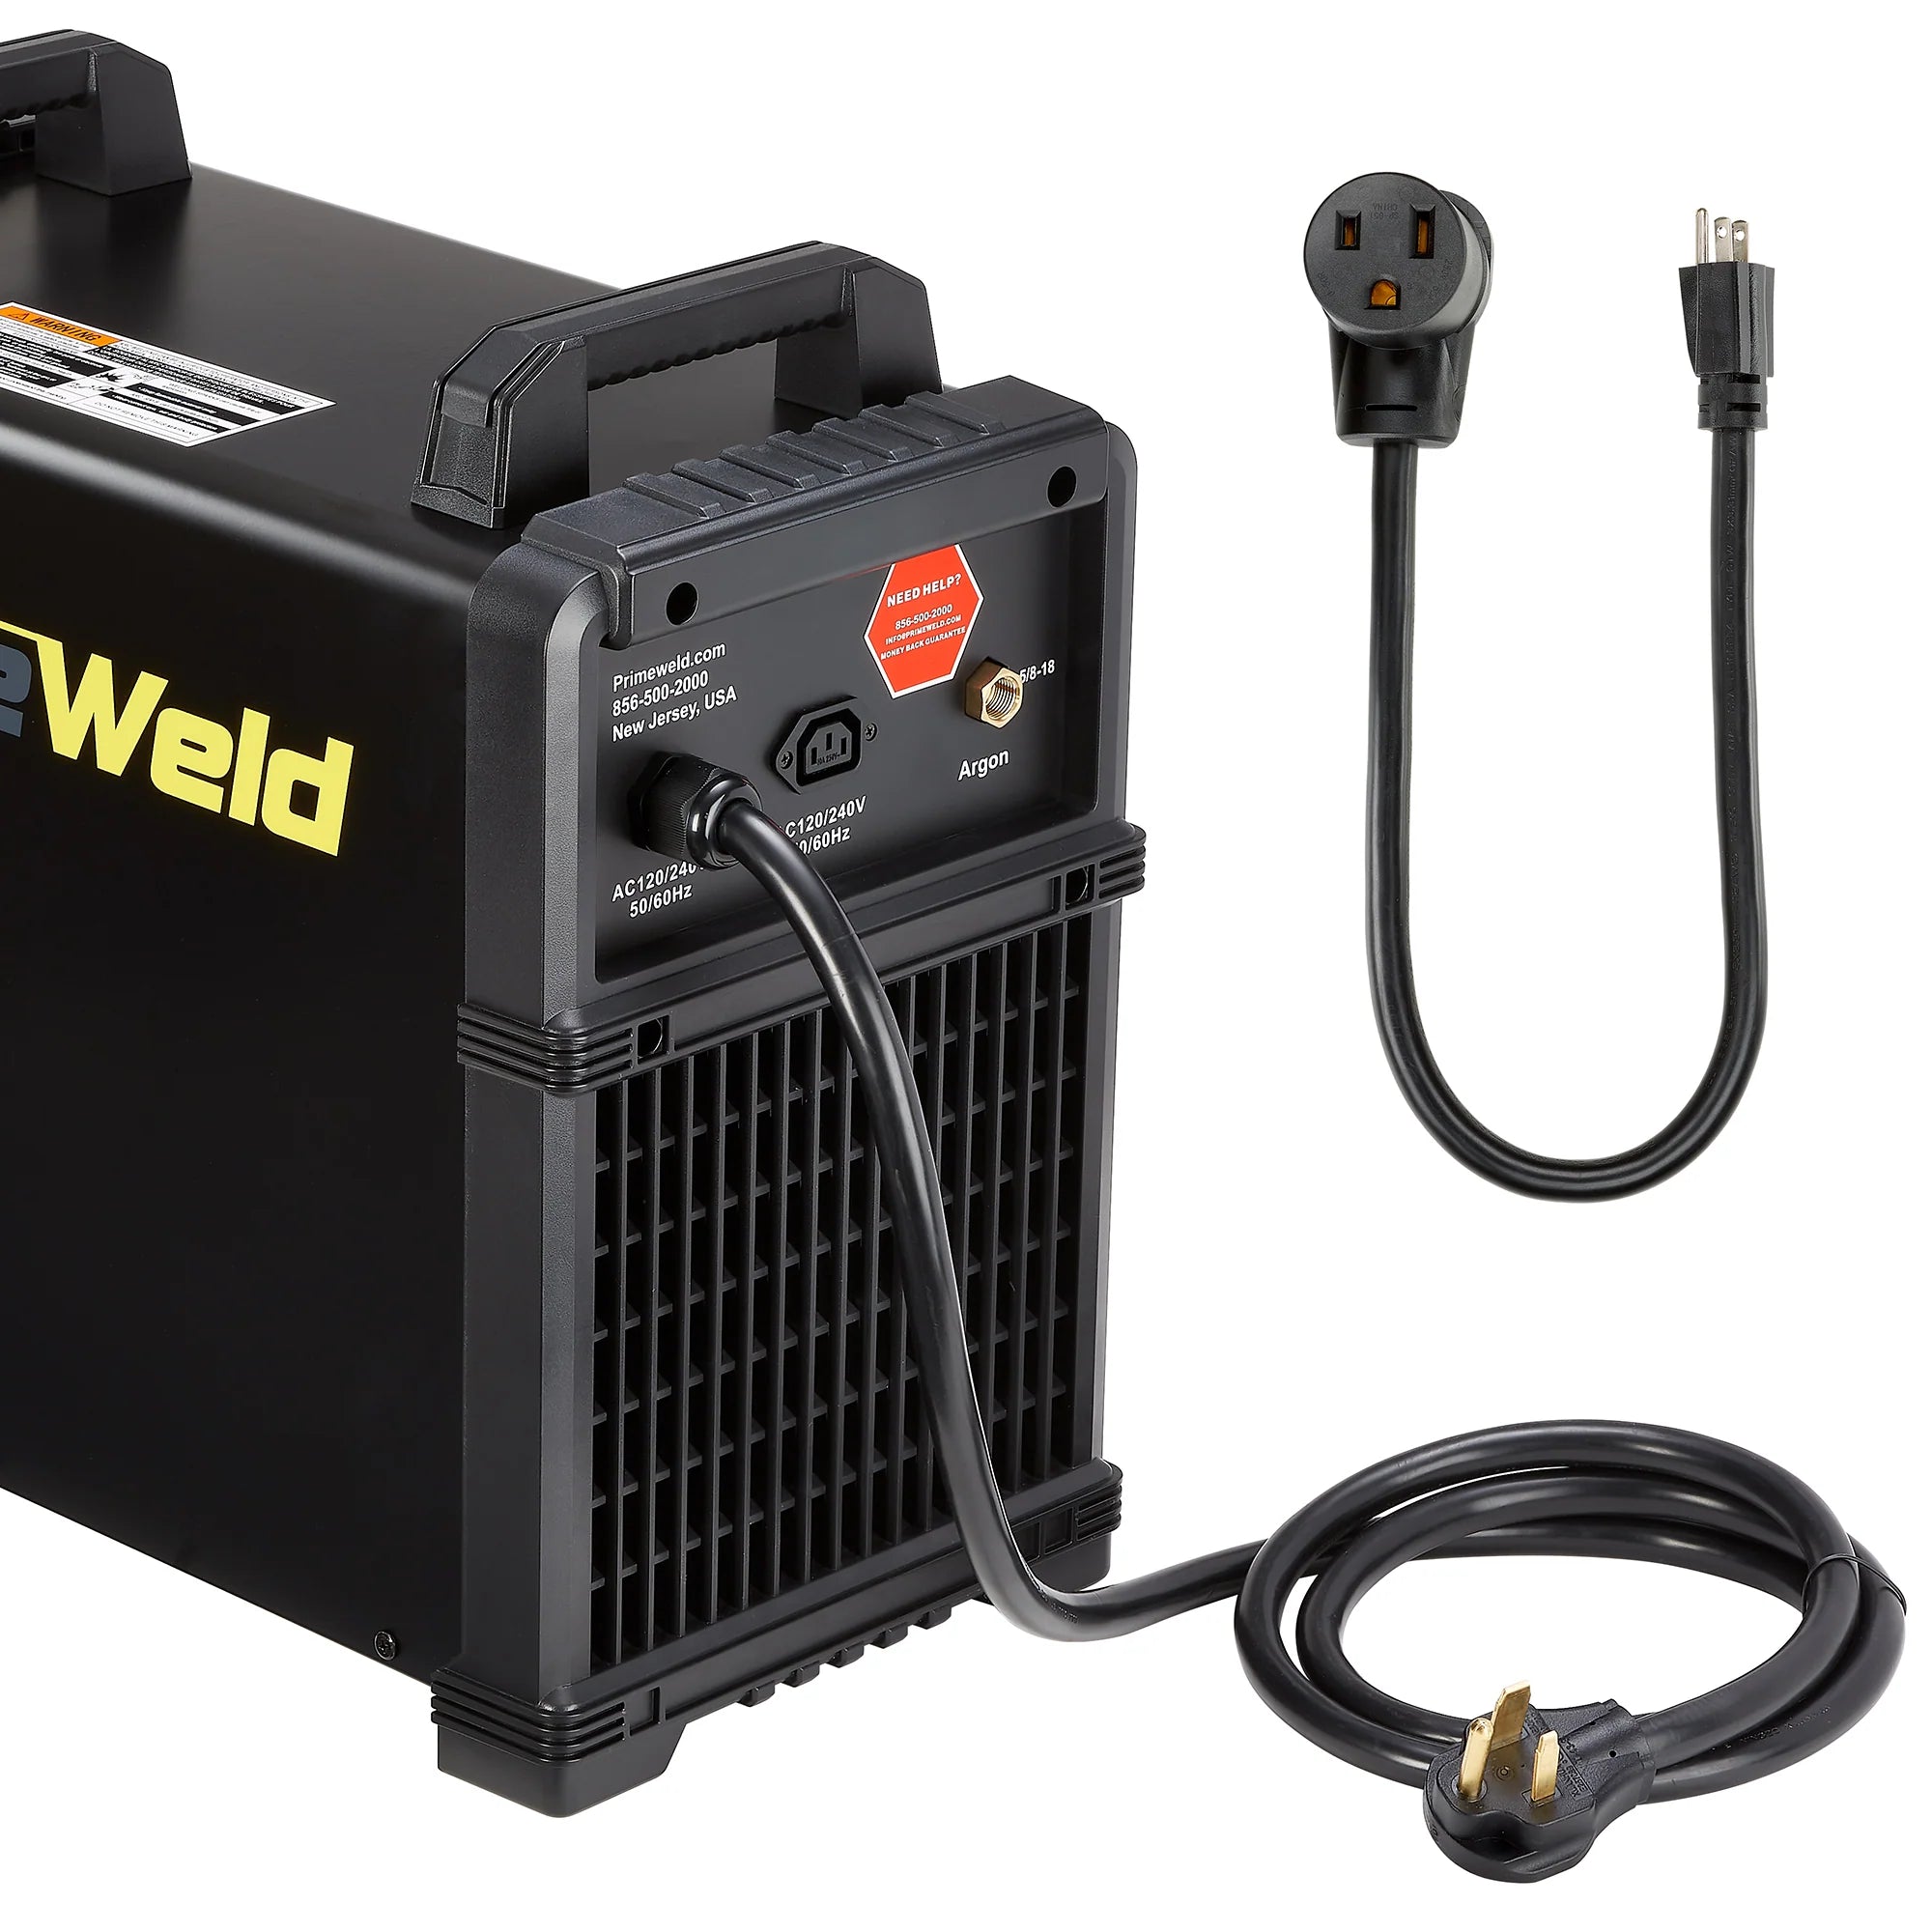 PrimeWeld TIG325X AC/DC TIG Welder With Foot Pedal